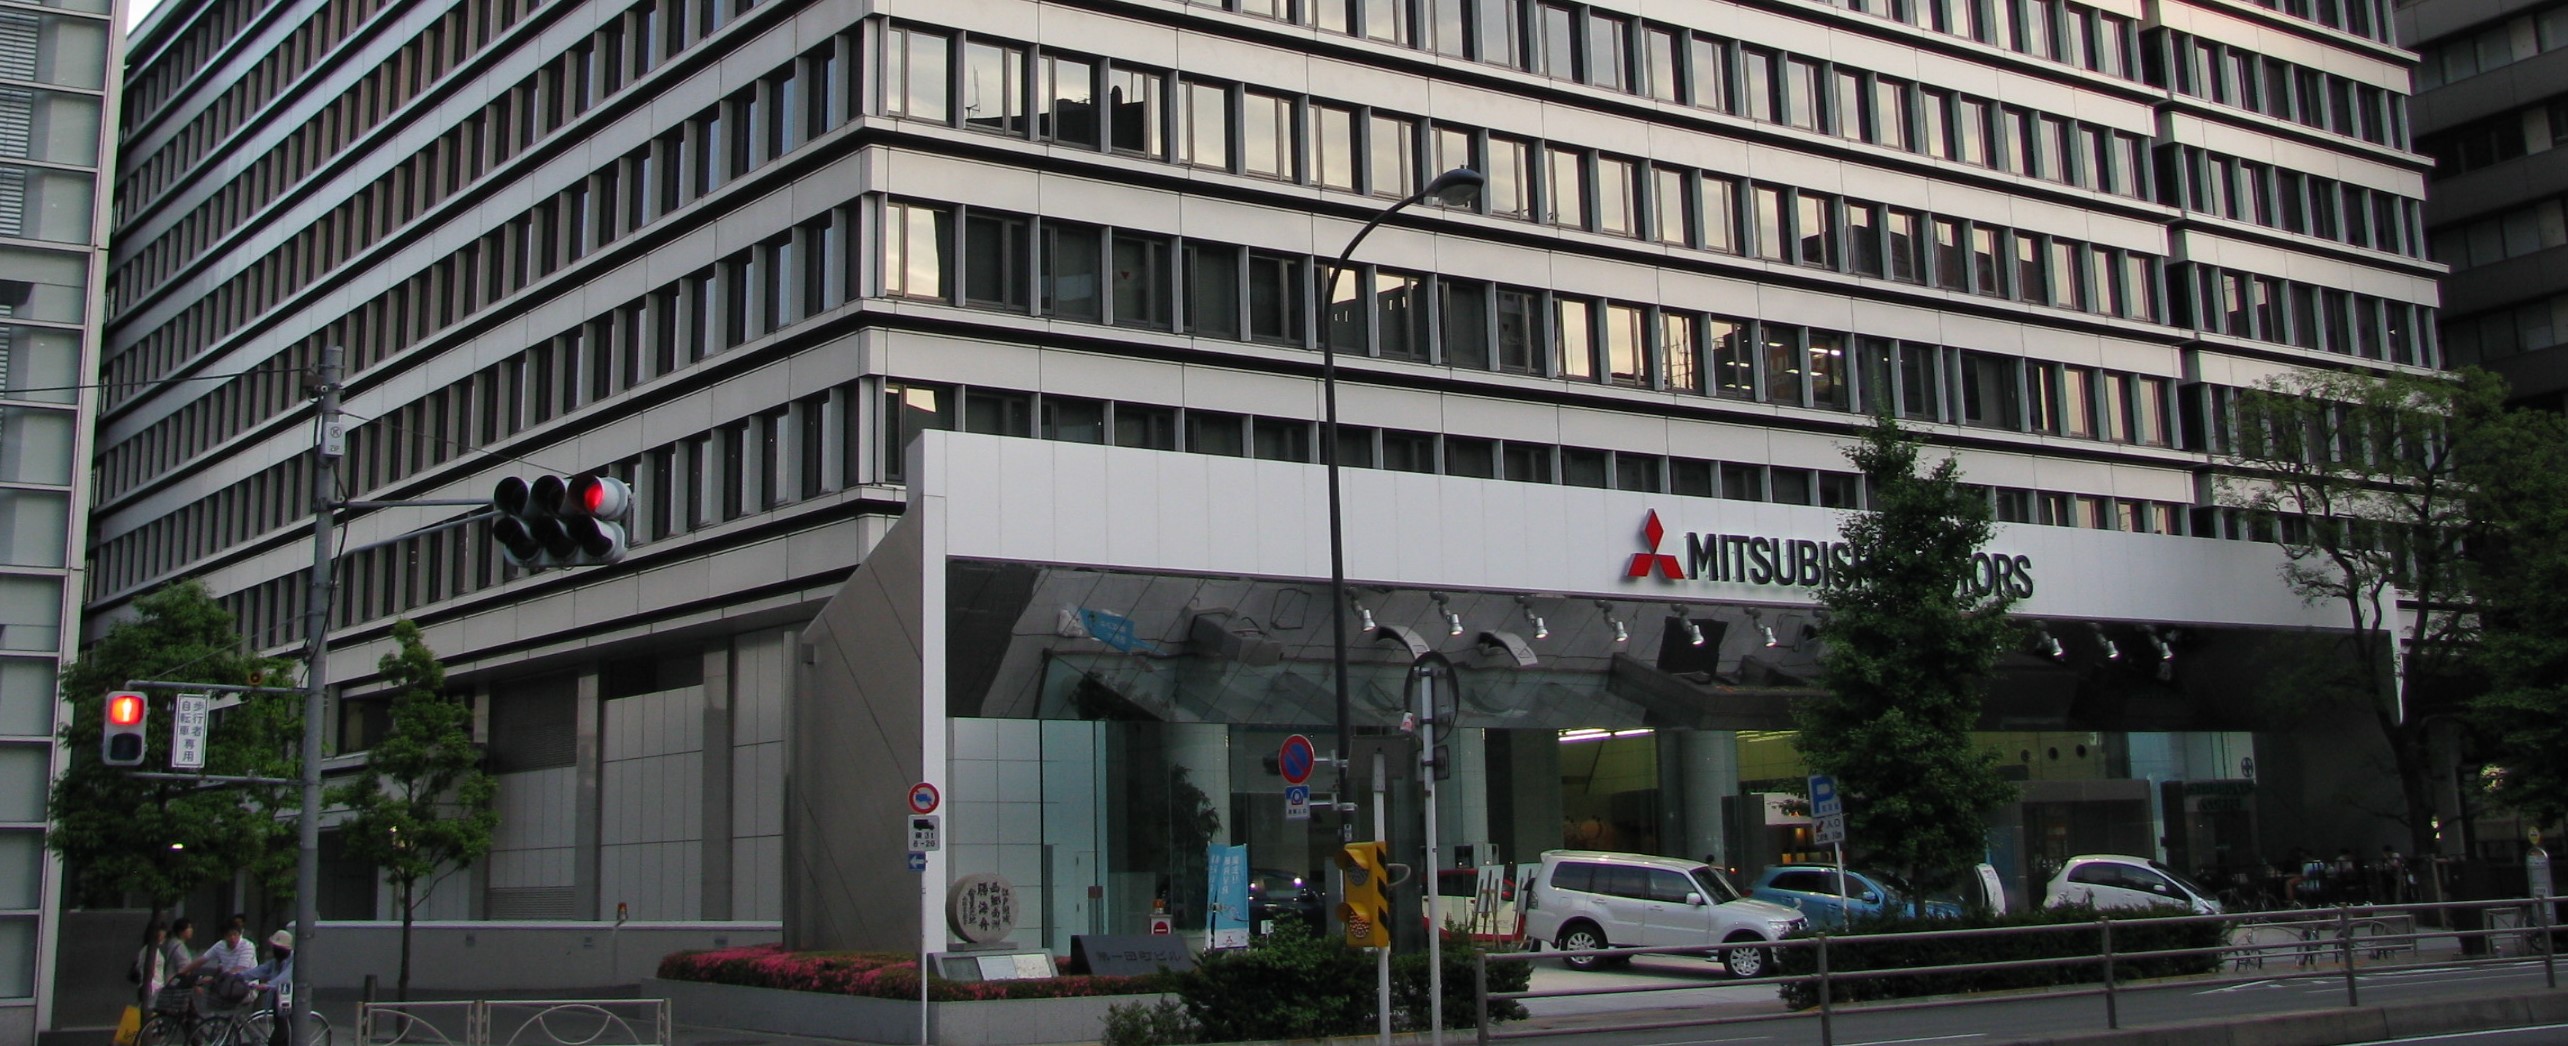 South Korea court orders Mitsubishi of Japan to pay for forced labor during WWII